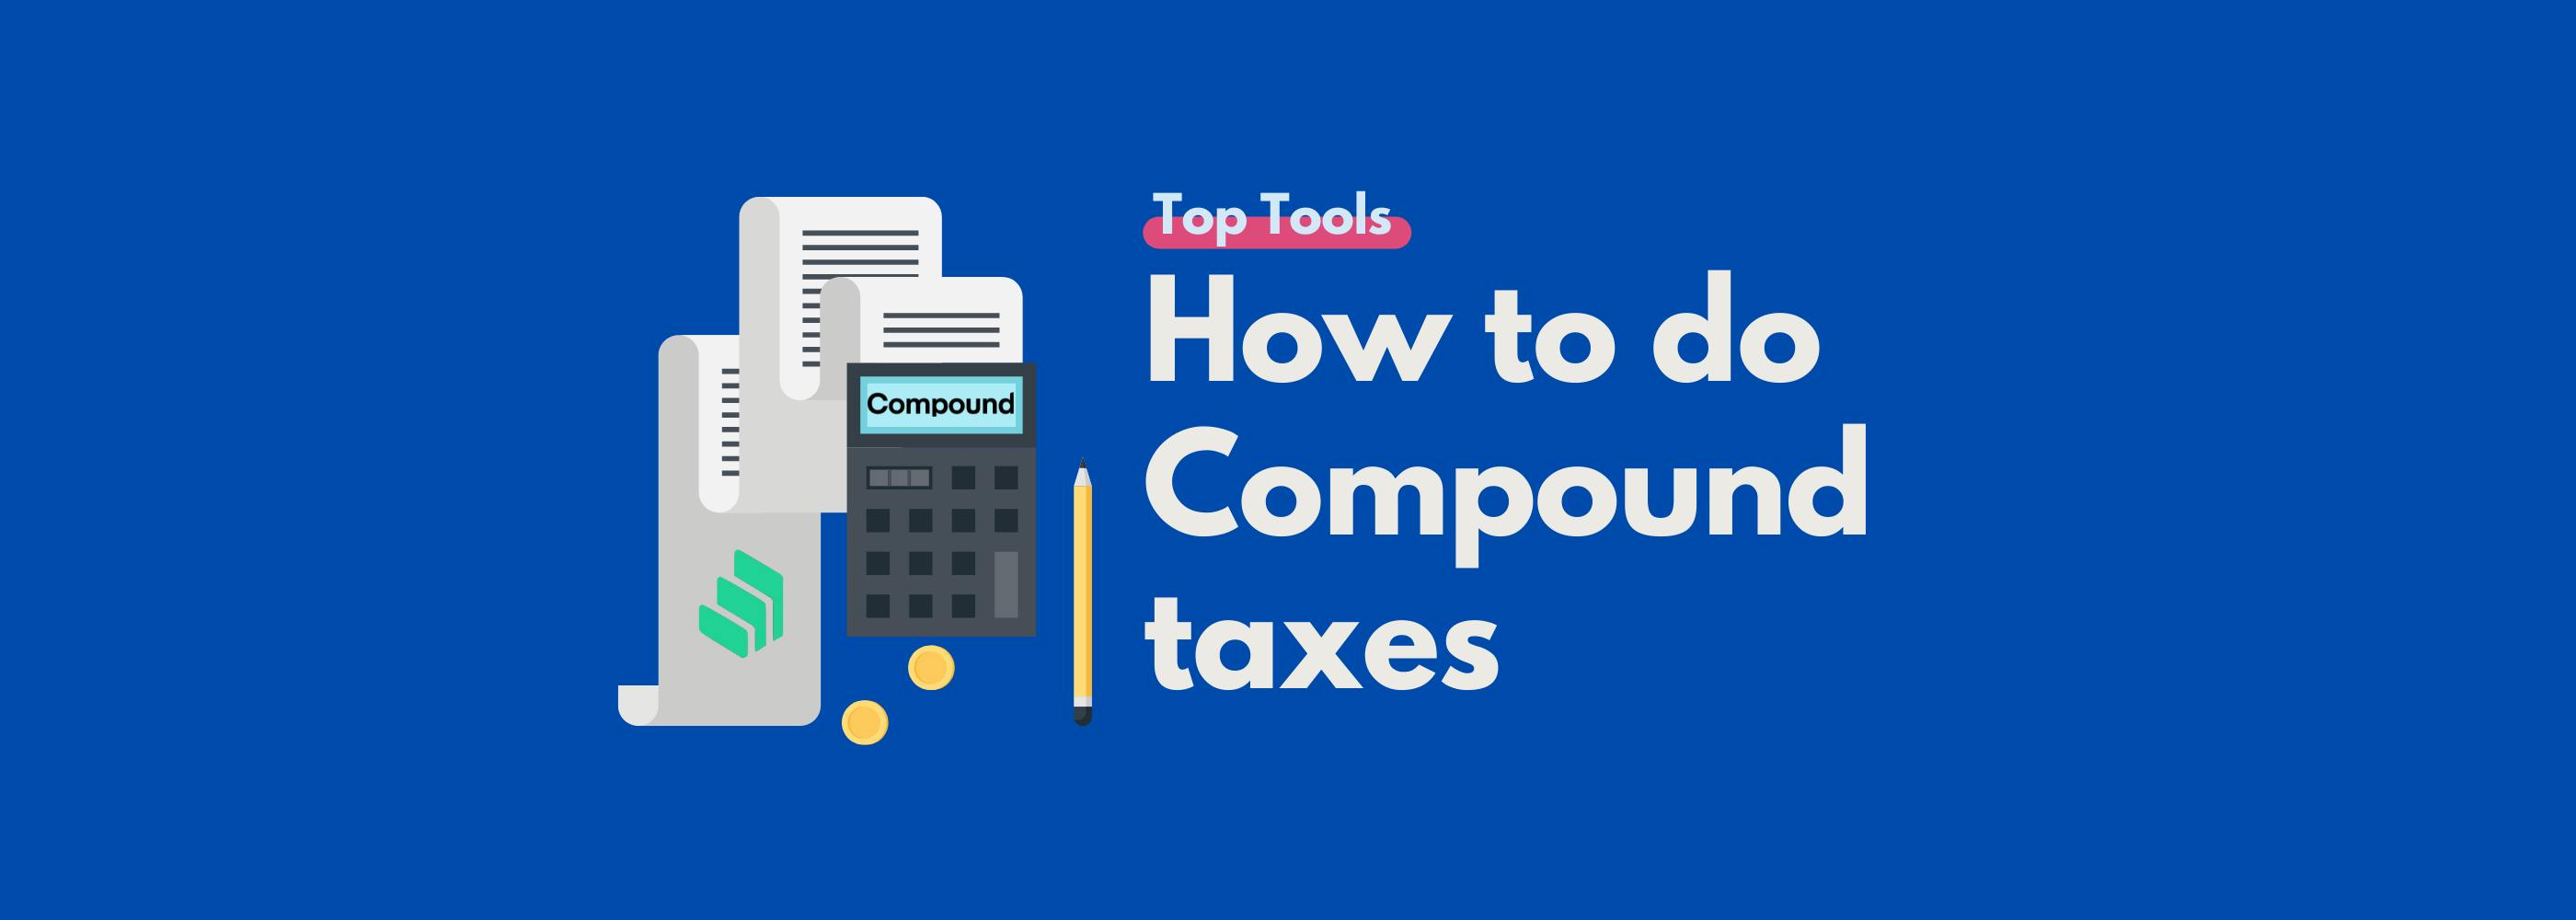 Compound Taxes Guide